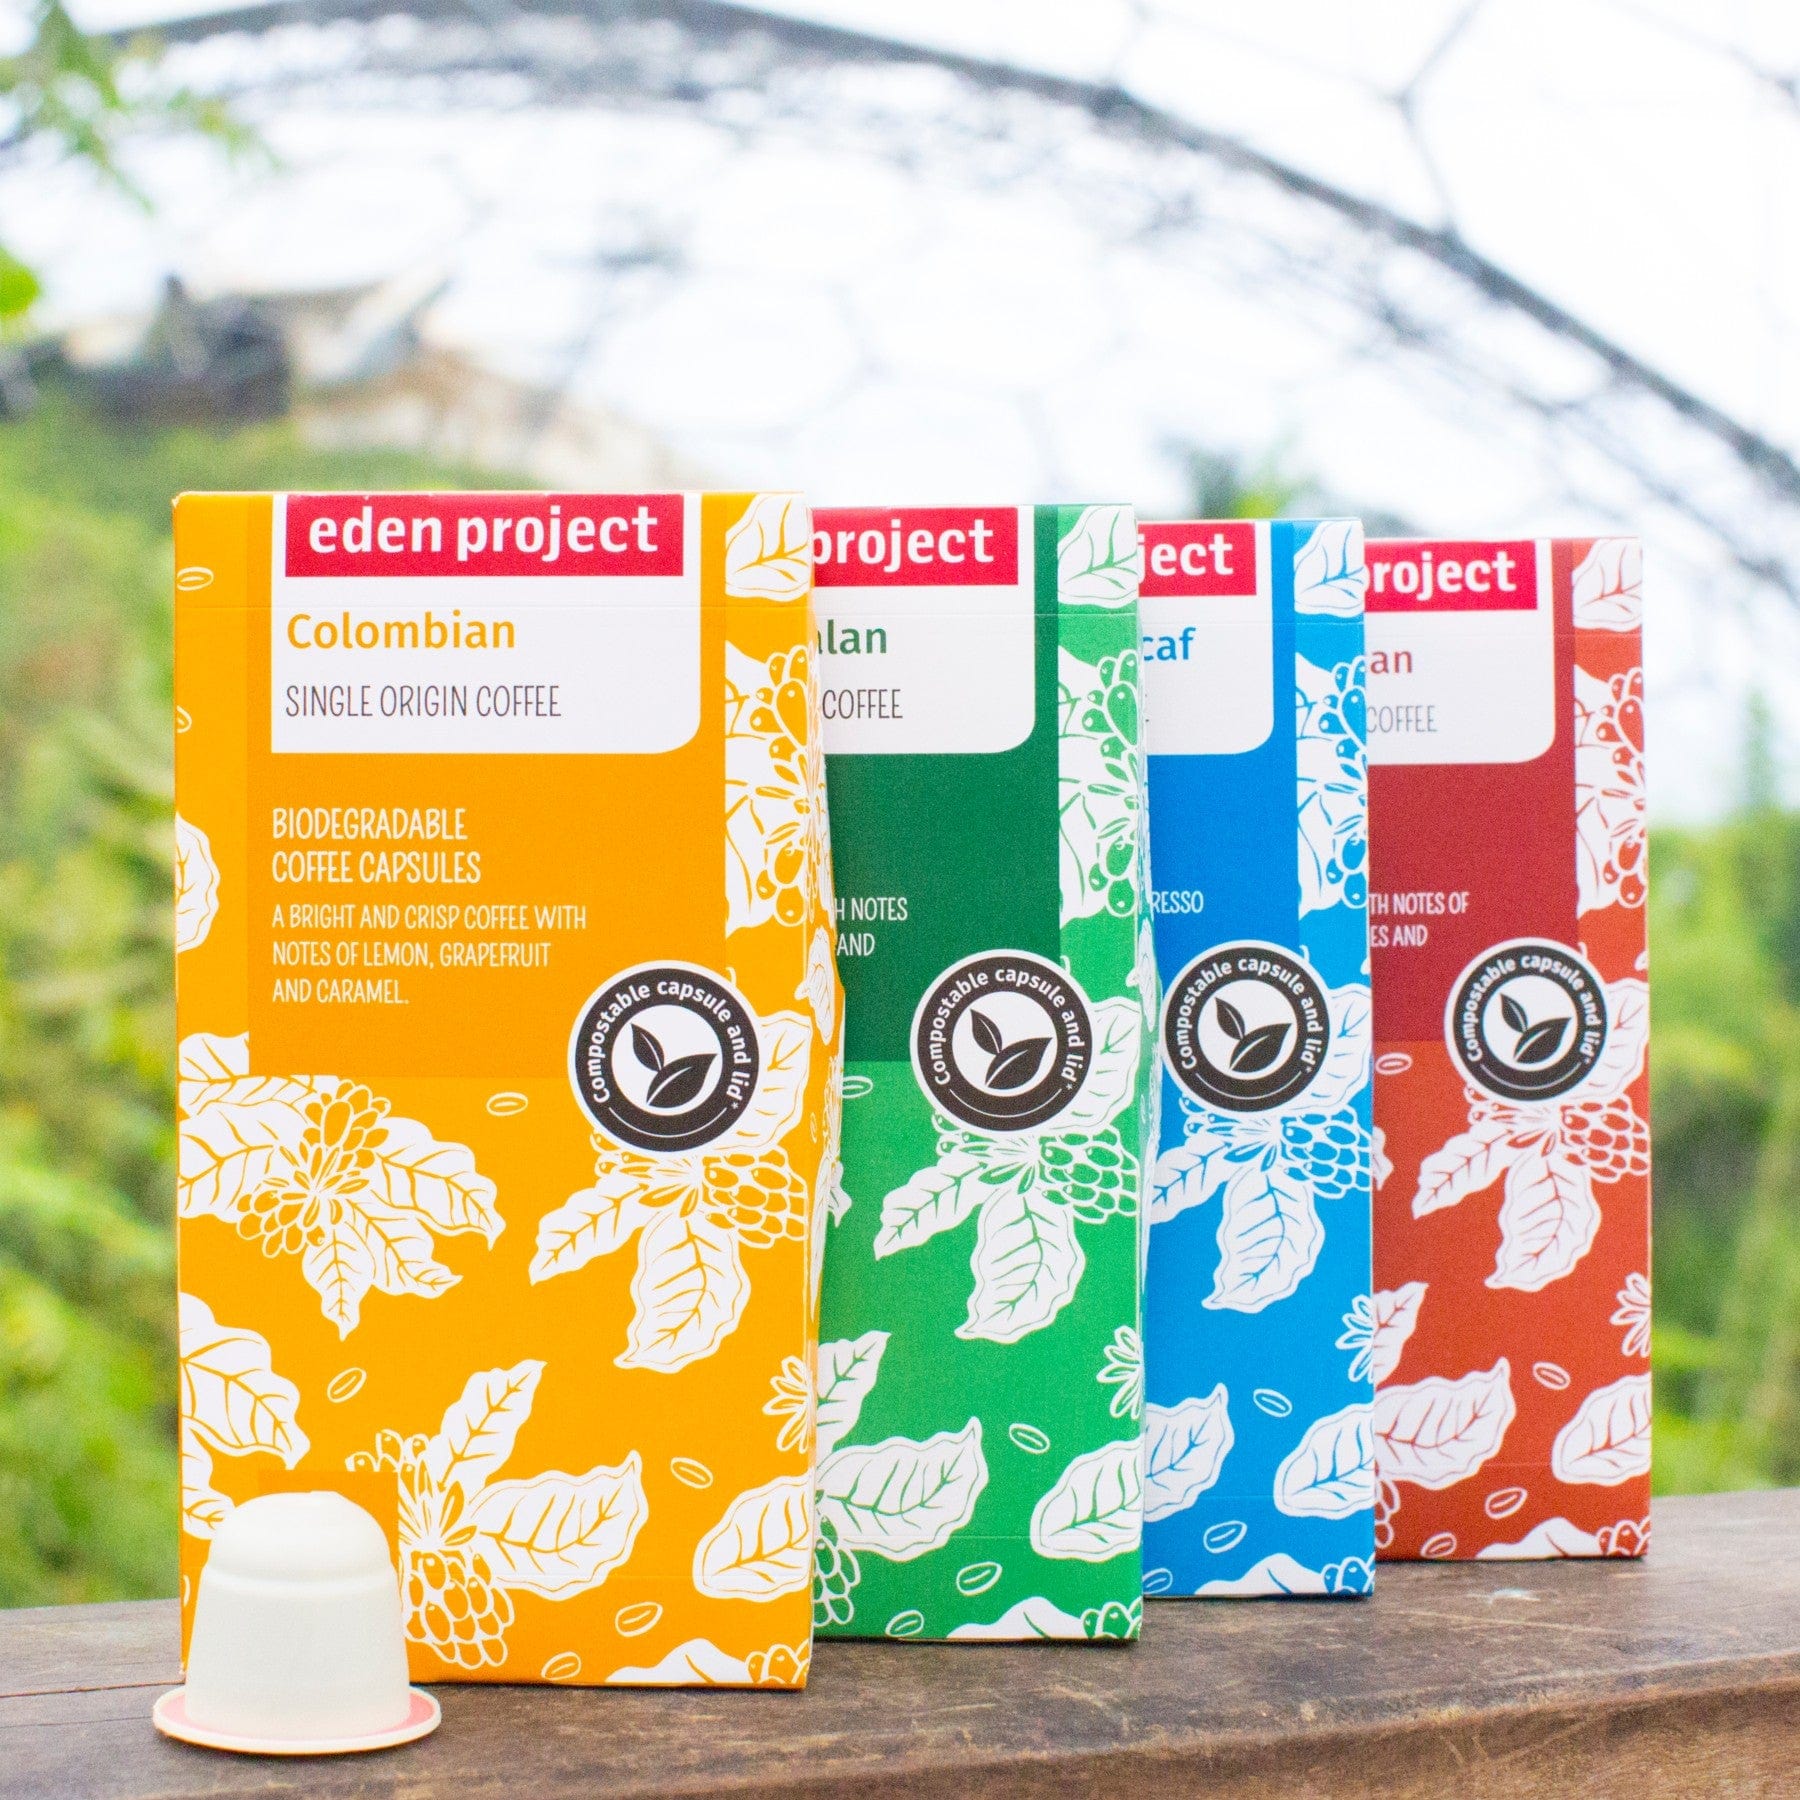 Colorful Eden Project biodegradable coffee capsules packaging for Colombian, Guatemalan, Decaf, and Organic varieties displayed on wooden surface with natural background.